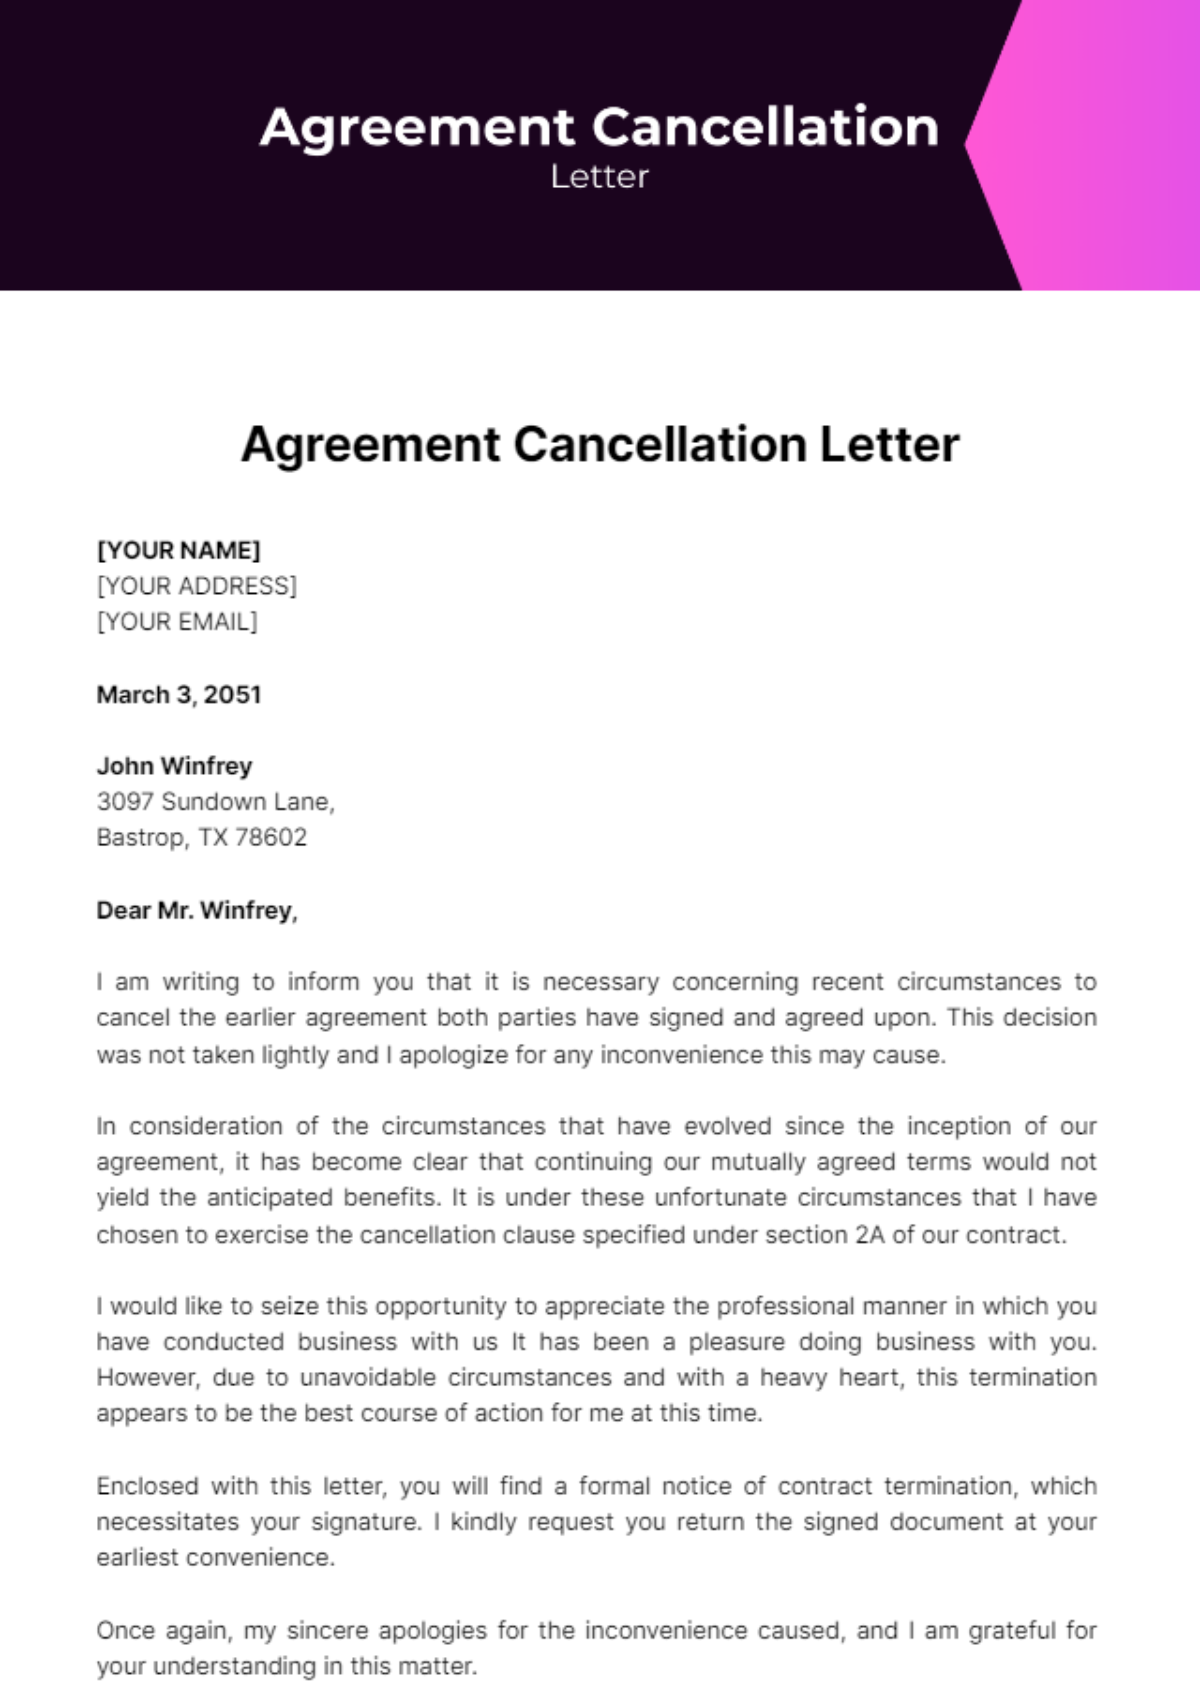 Free Agreement Cancellation Letter Template